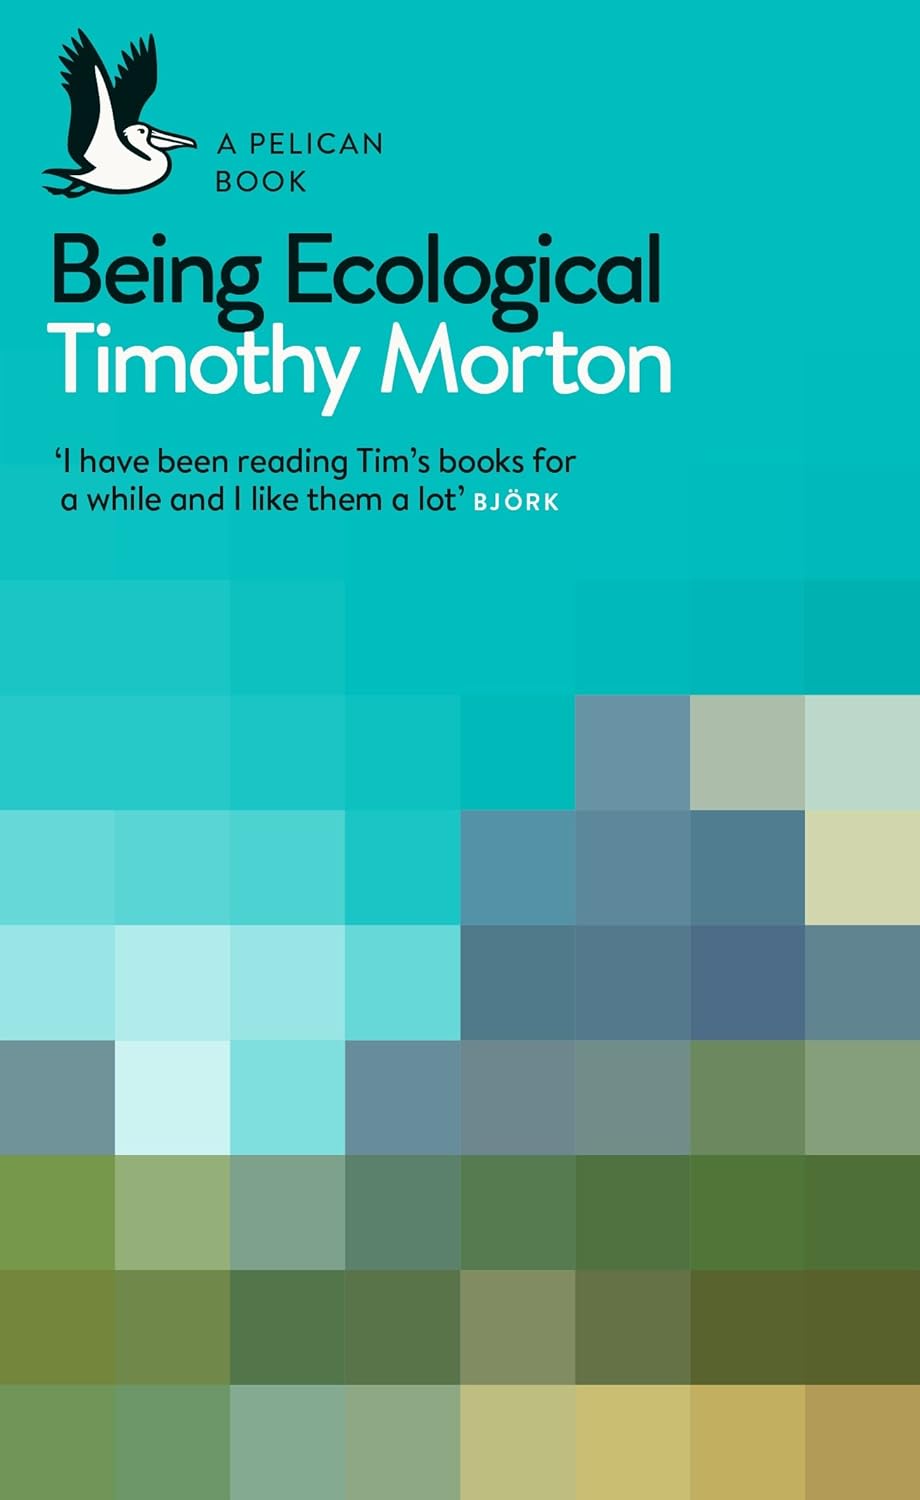 Timothy Morton: Being Ecological (2018, Penguin Books, Limited)